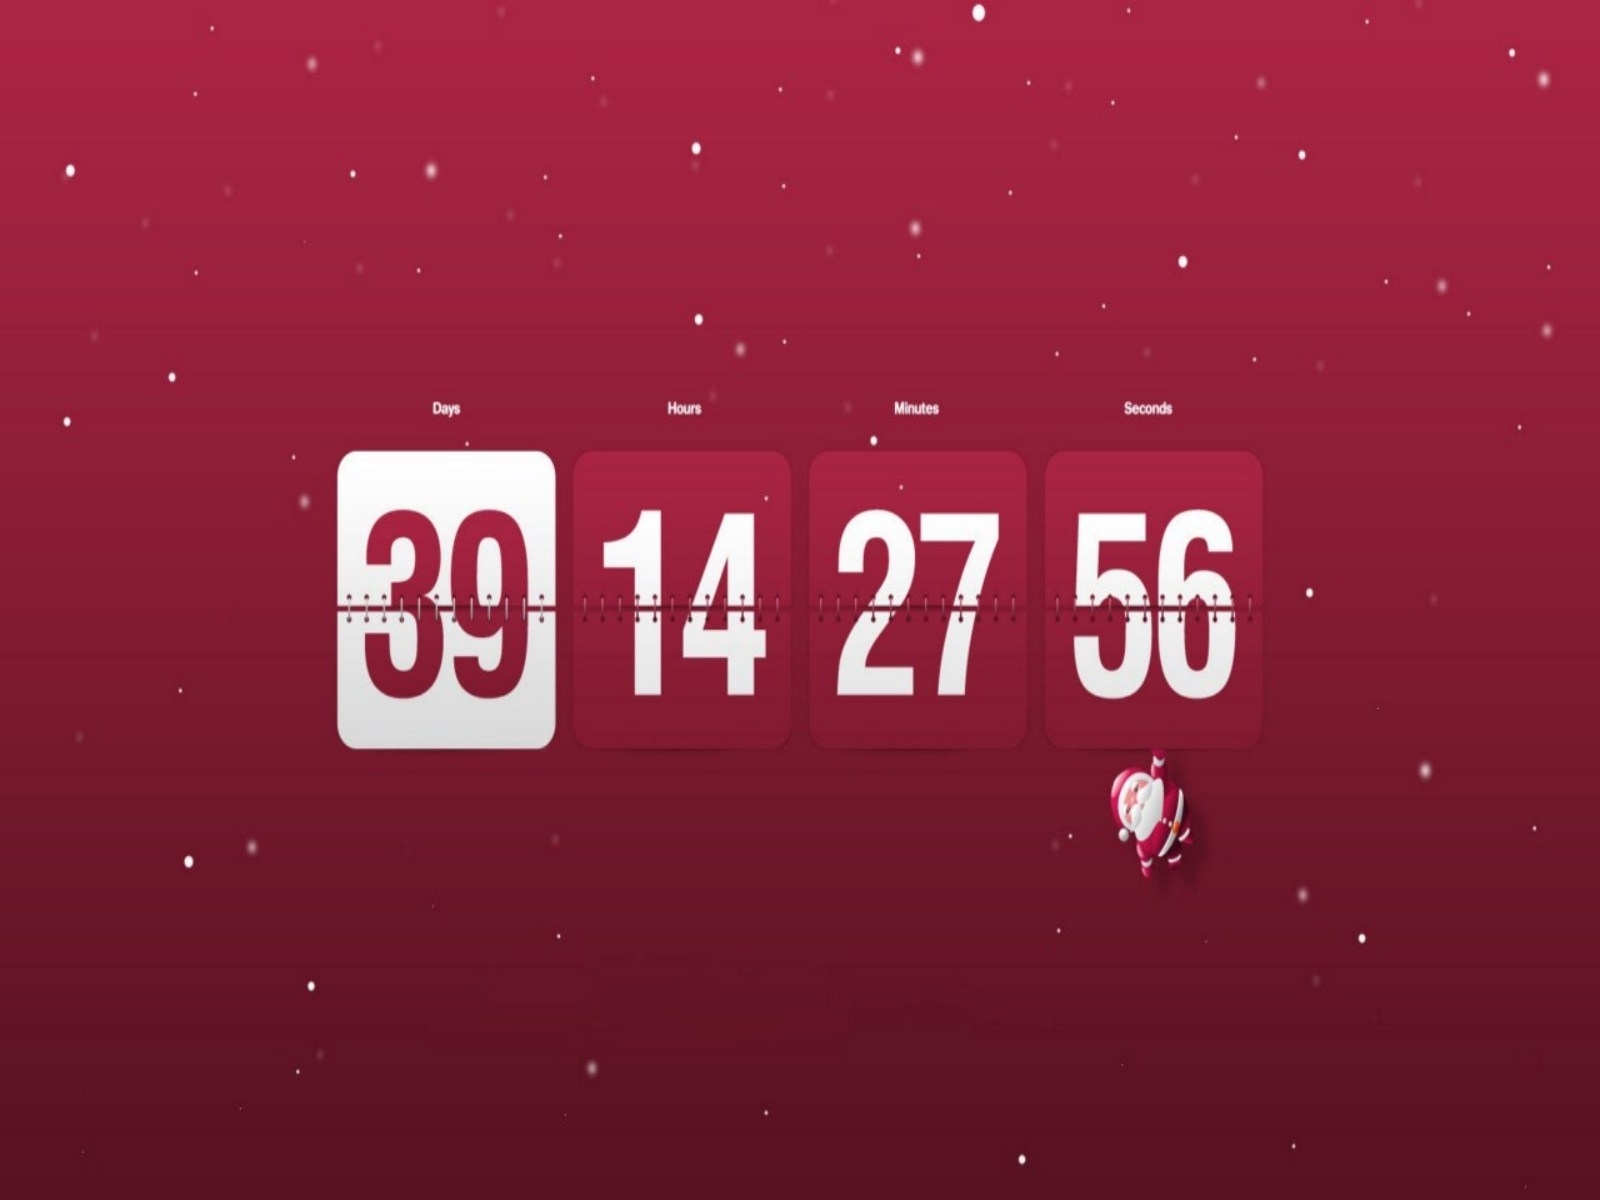 Best 50+ Countdown To Christmas Wallpaper On Hipwallpaper Add Weeks Countdown Timer To Screensaver